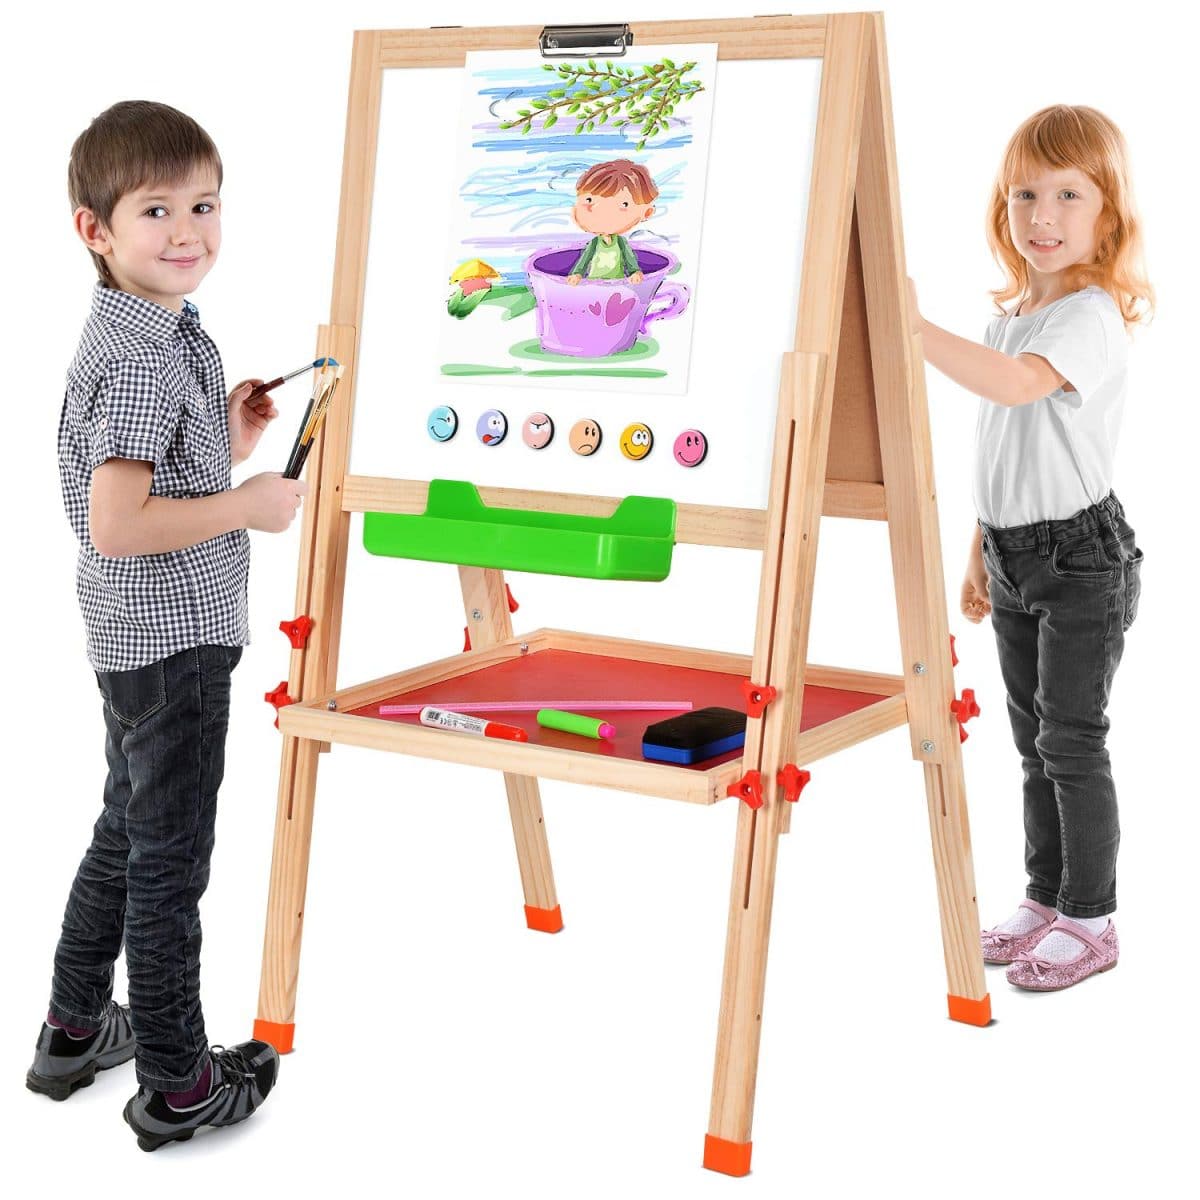 Art Supply Flip-Over Childrens Double-Sided Paint and Drawing Art Easel Board with Chalkboard 3 Storage Bins Dry Erase Board Paper Roll Chalk U.S Kids Toddlers Write Have Fun 5 No-Spill Cups